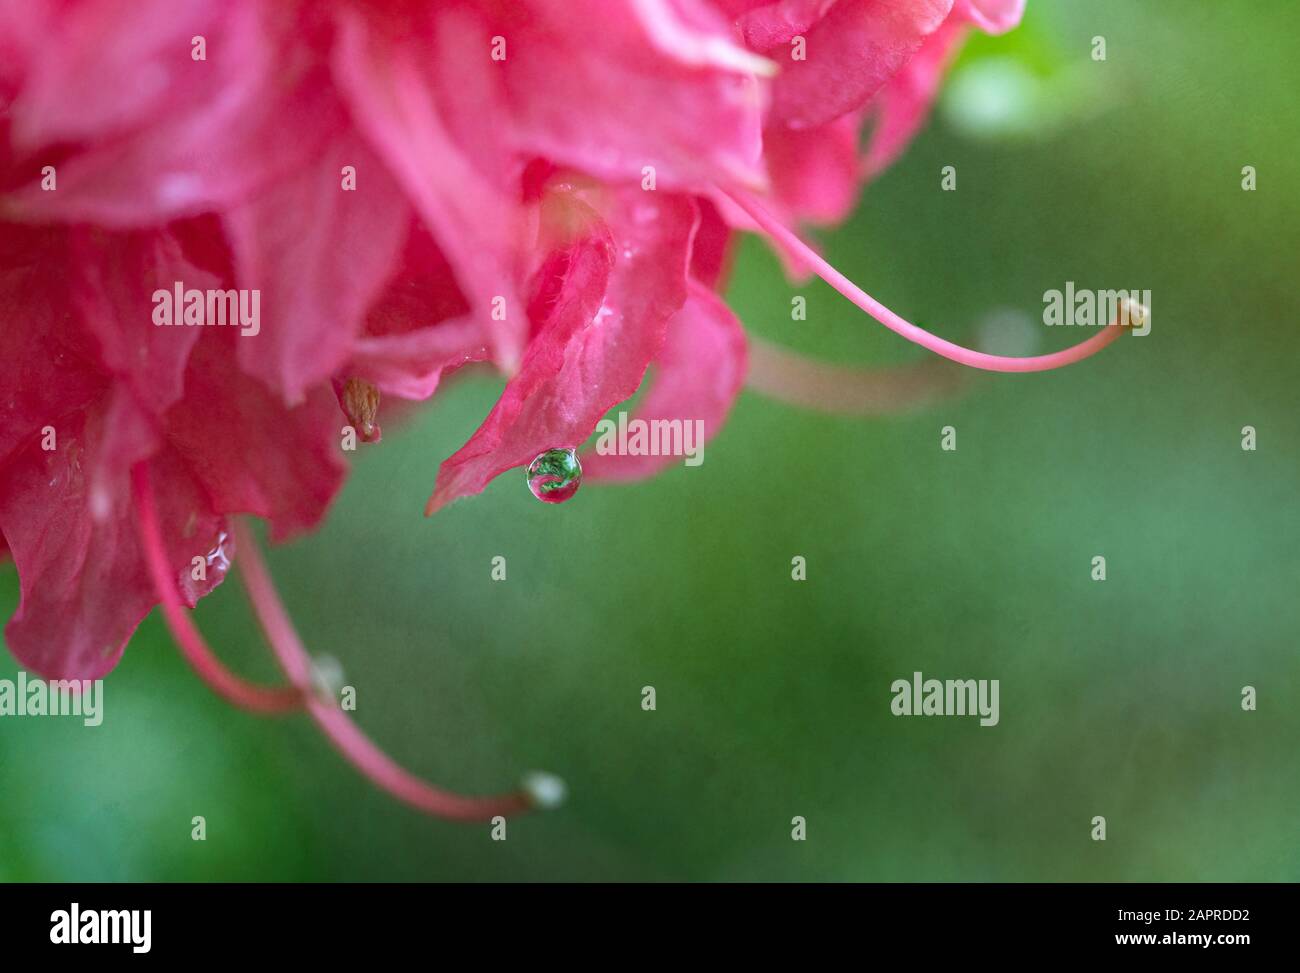 Close-up of Round Waterdrop Hanging Off Pink Azalea Petal with Reflection Stock Photo